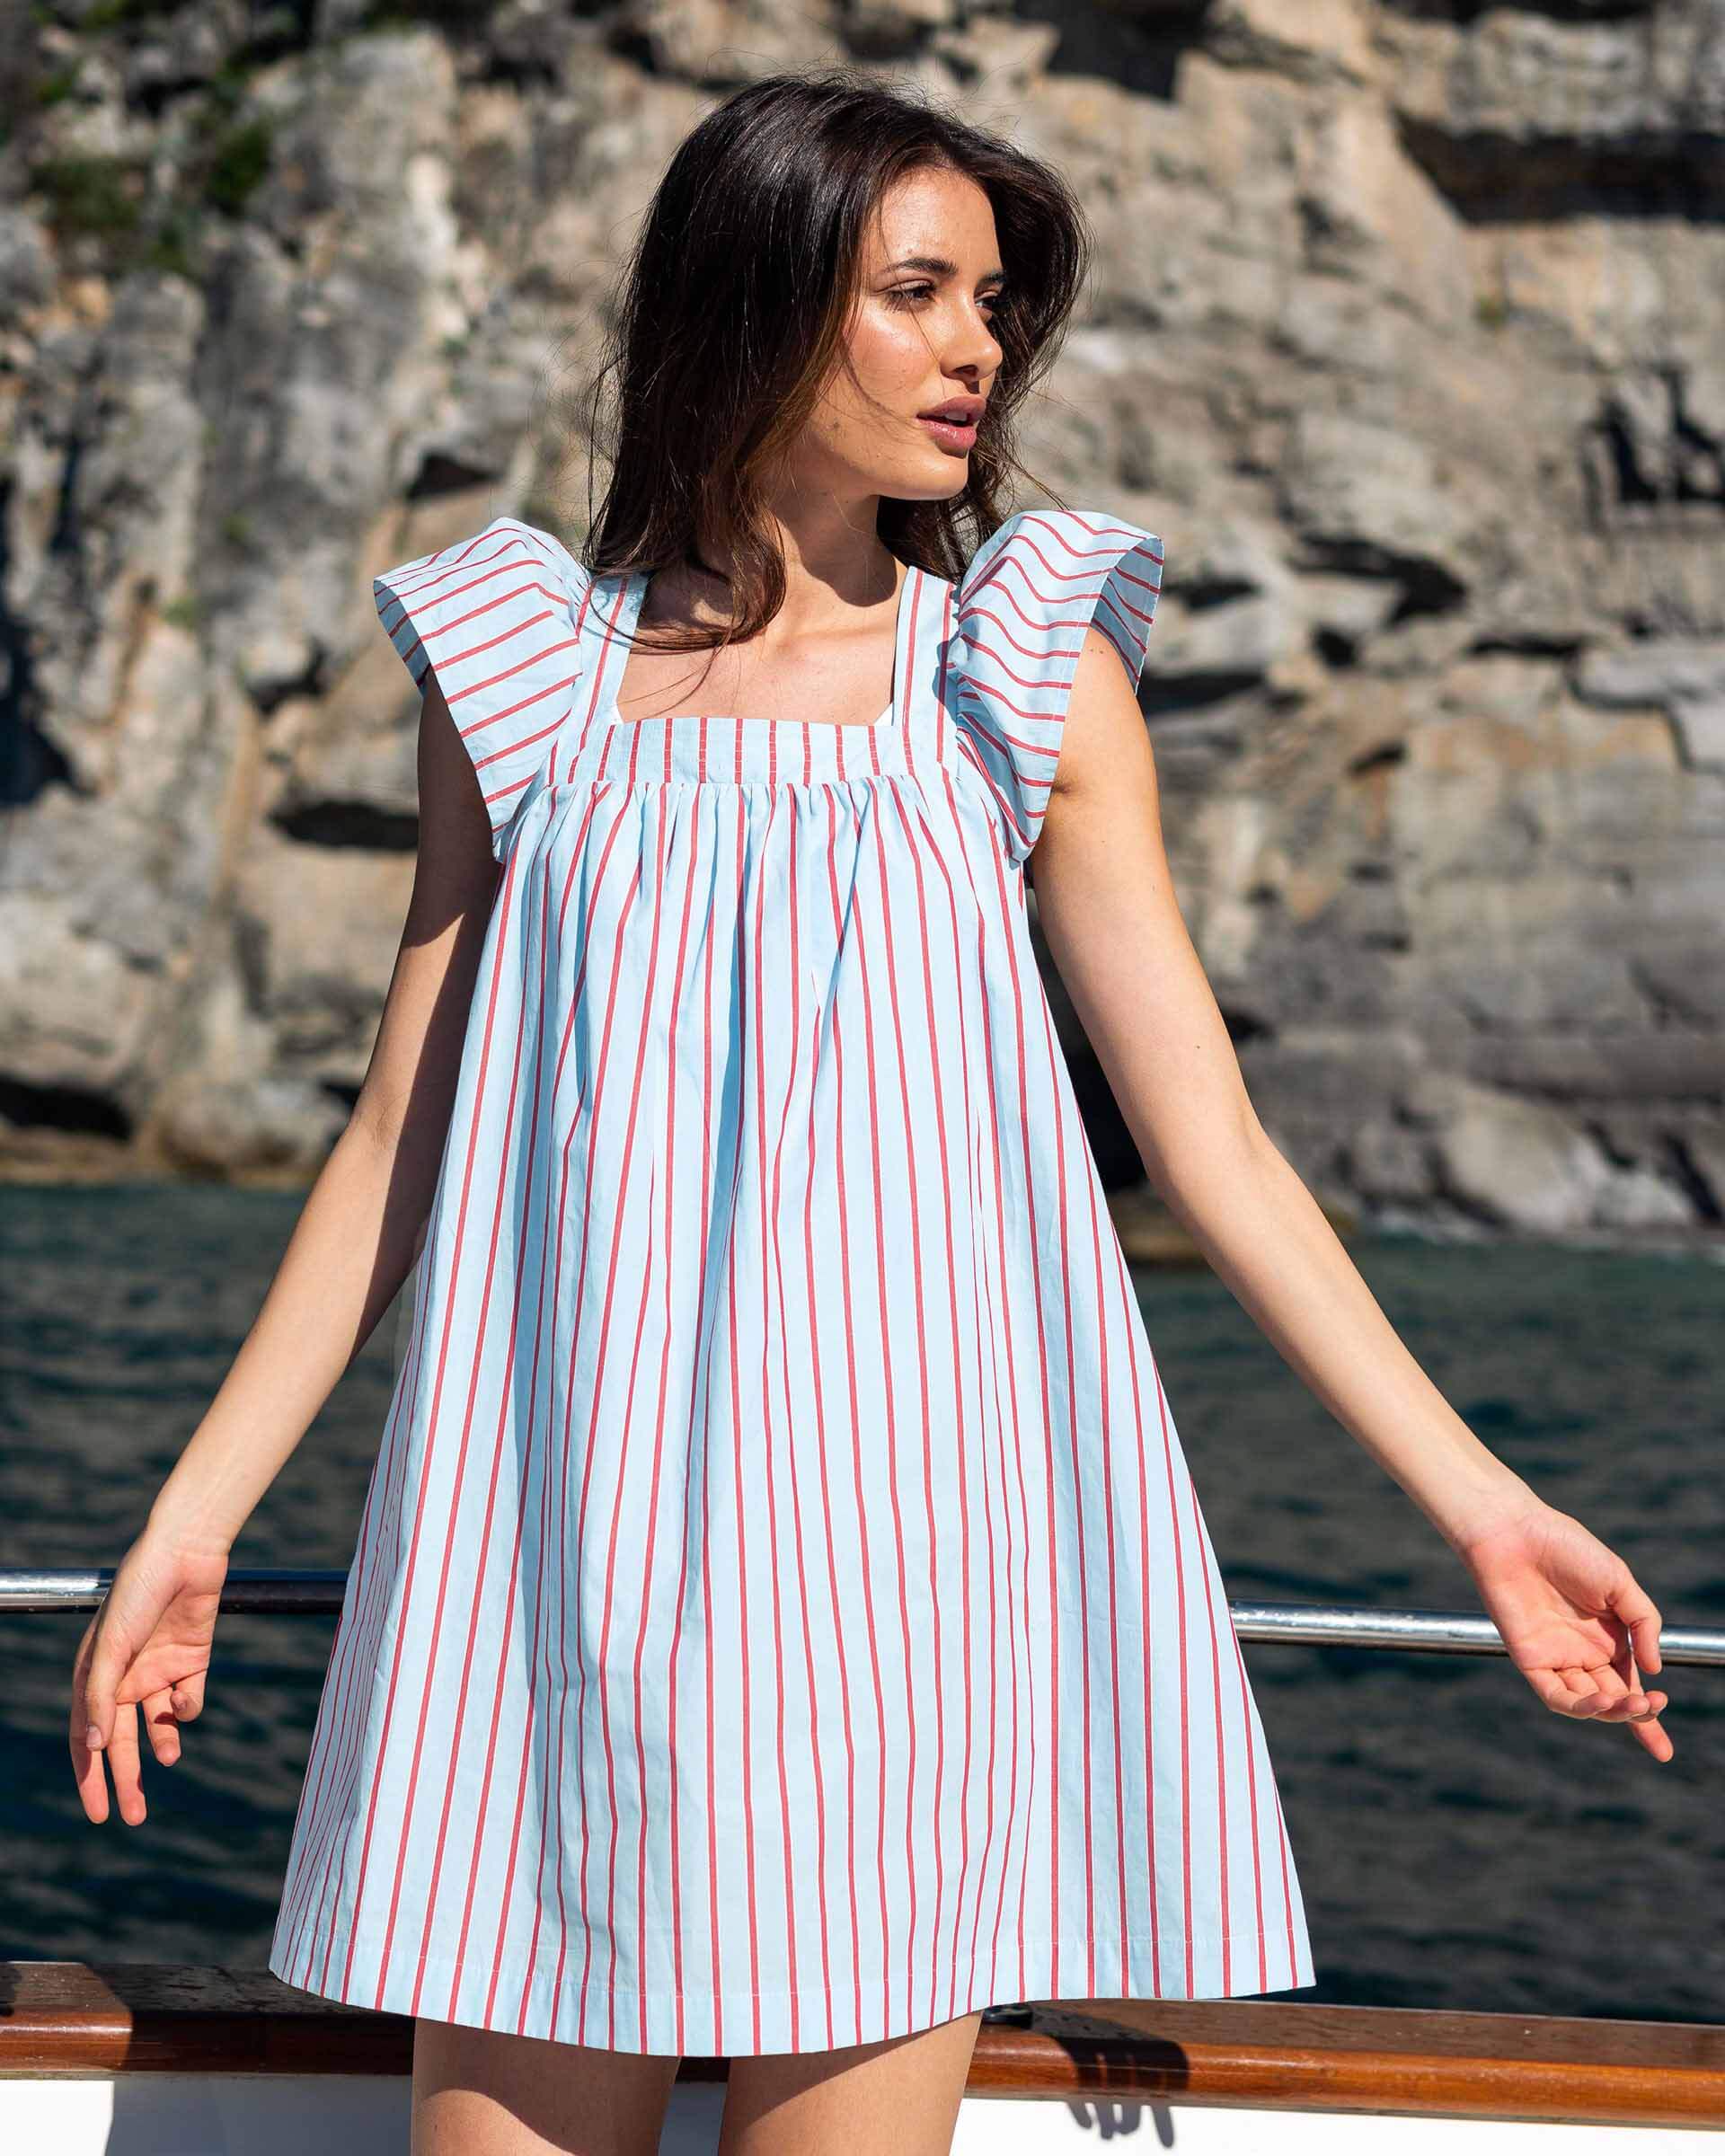 female wearing blue dress with red stripes sitting on a boat in Italy